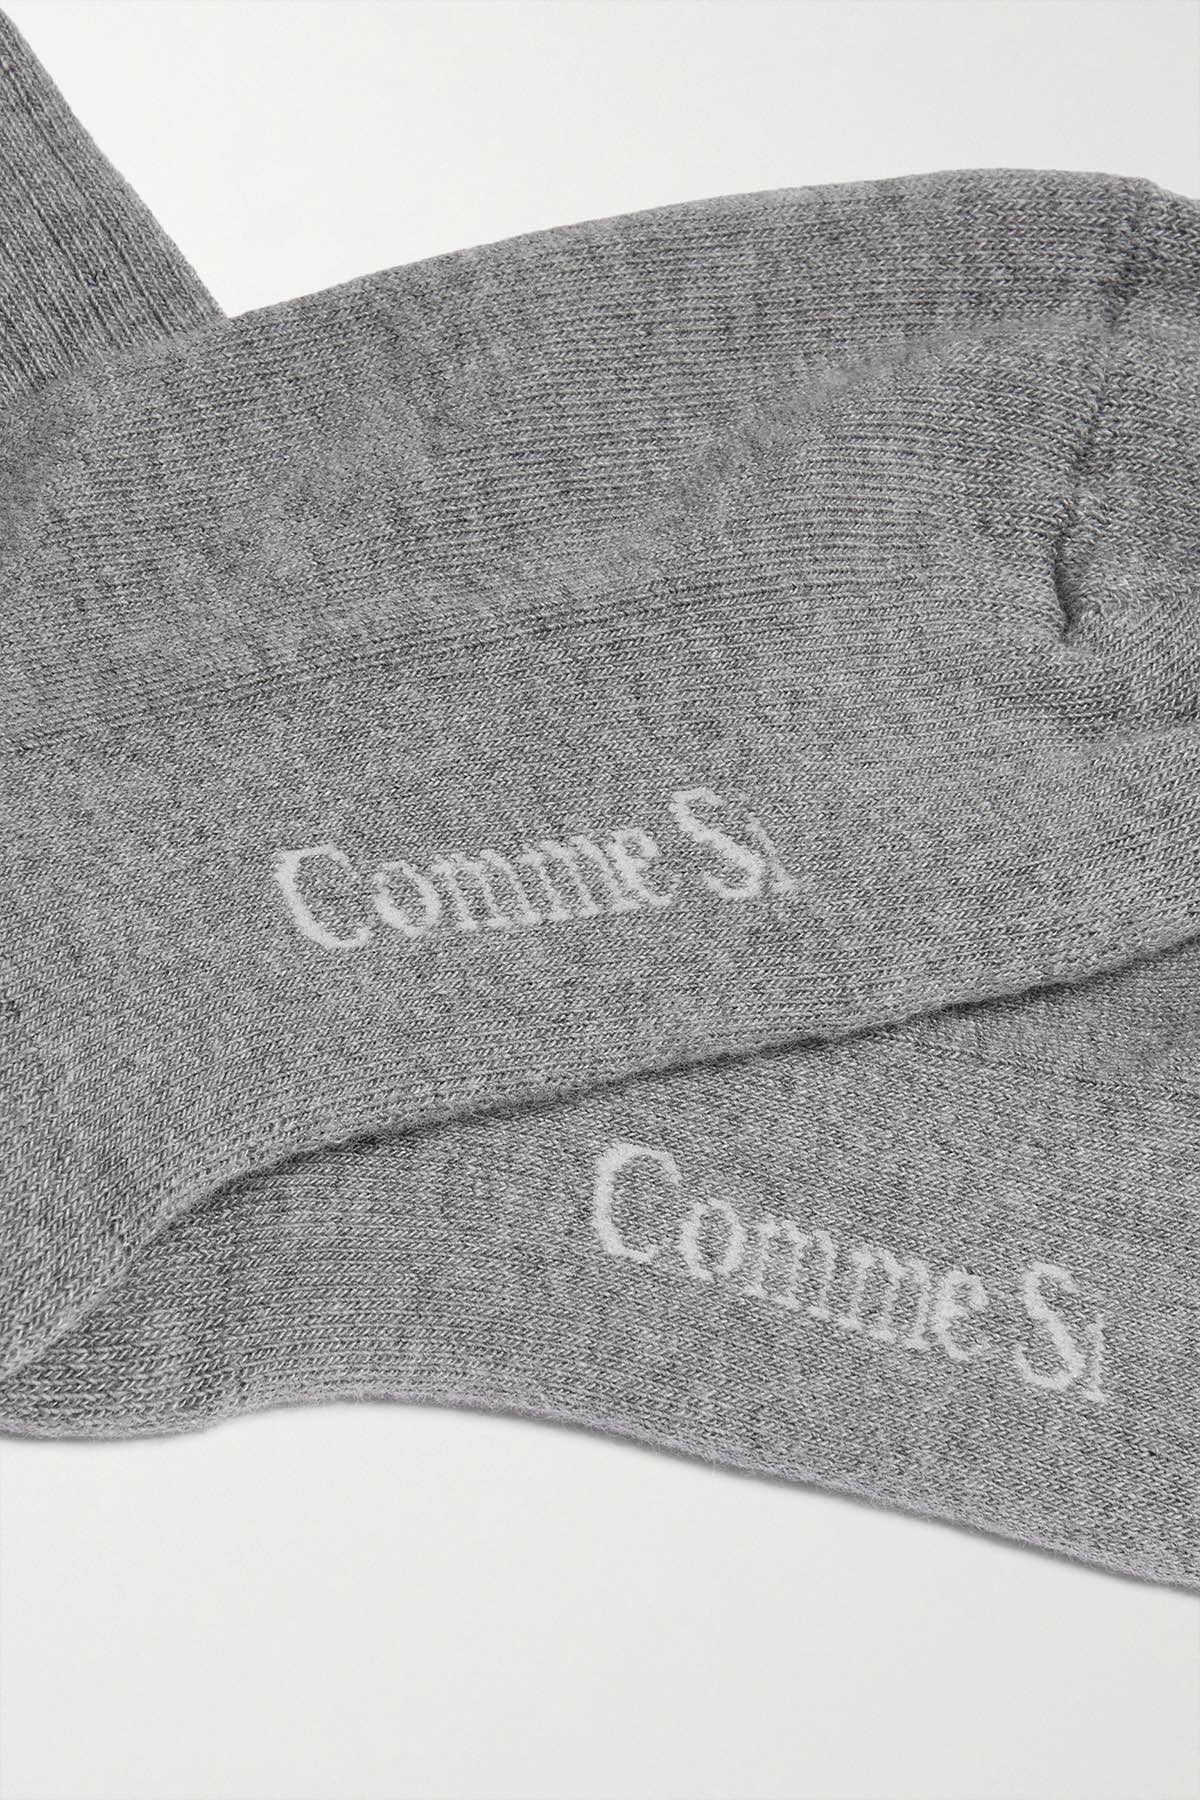 Footbed detail, The Everyday Sock in Dark Heather Grey, made with Organic Egyptian Cotton, by Comme Si